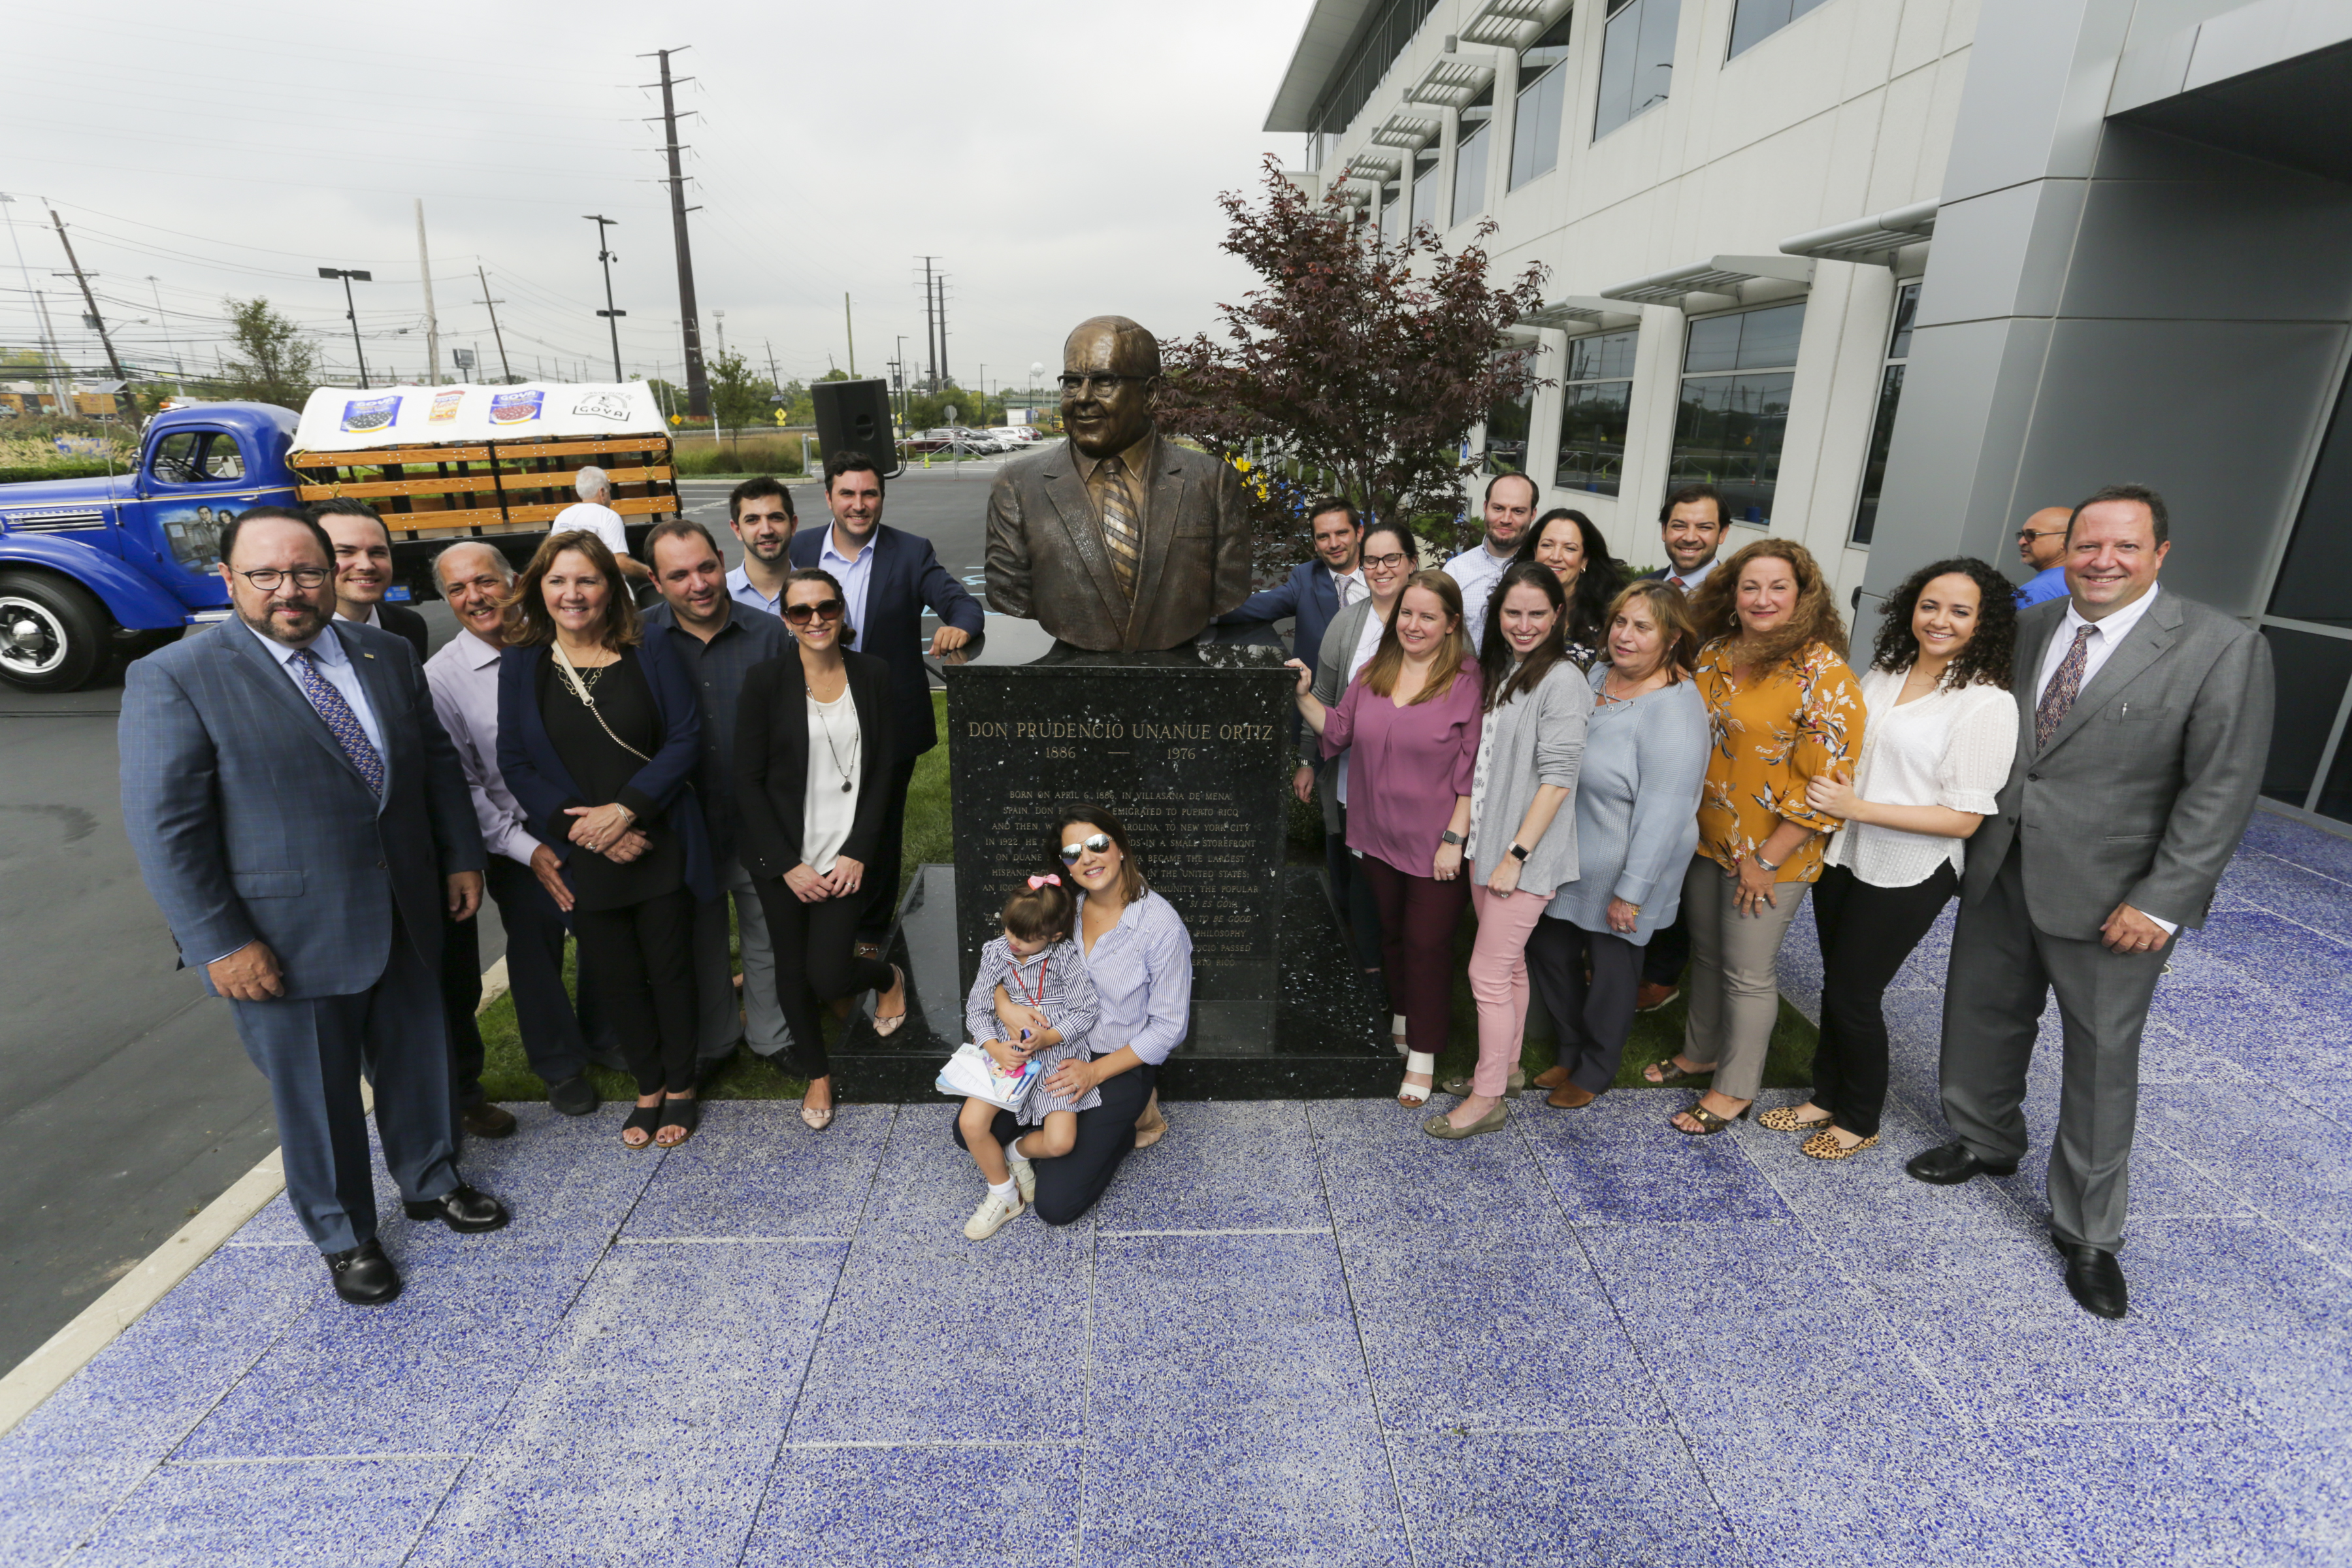 Press Release: GOYA UNVEILS SCULPTURE OF FOUNDER OF GOYA FOODS DON PRUDENCIO UNANUE IN CELEBRATION OF HISPANIC HERITAGE MONTH